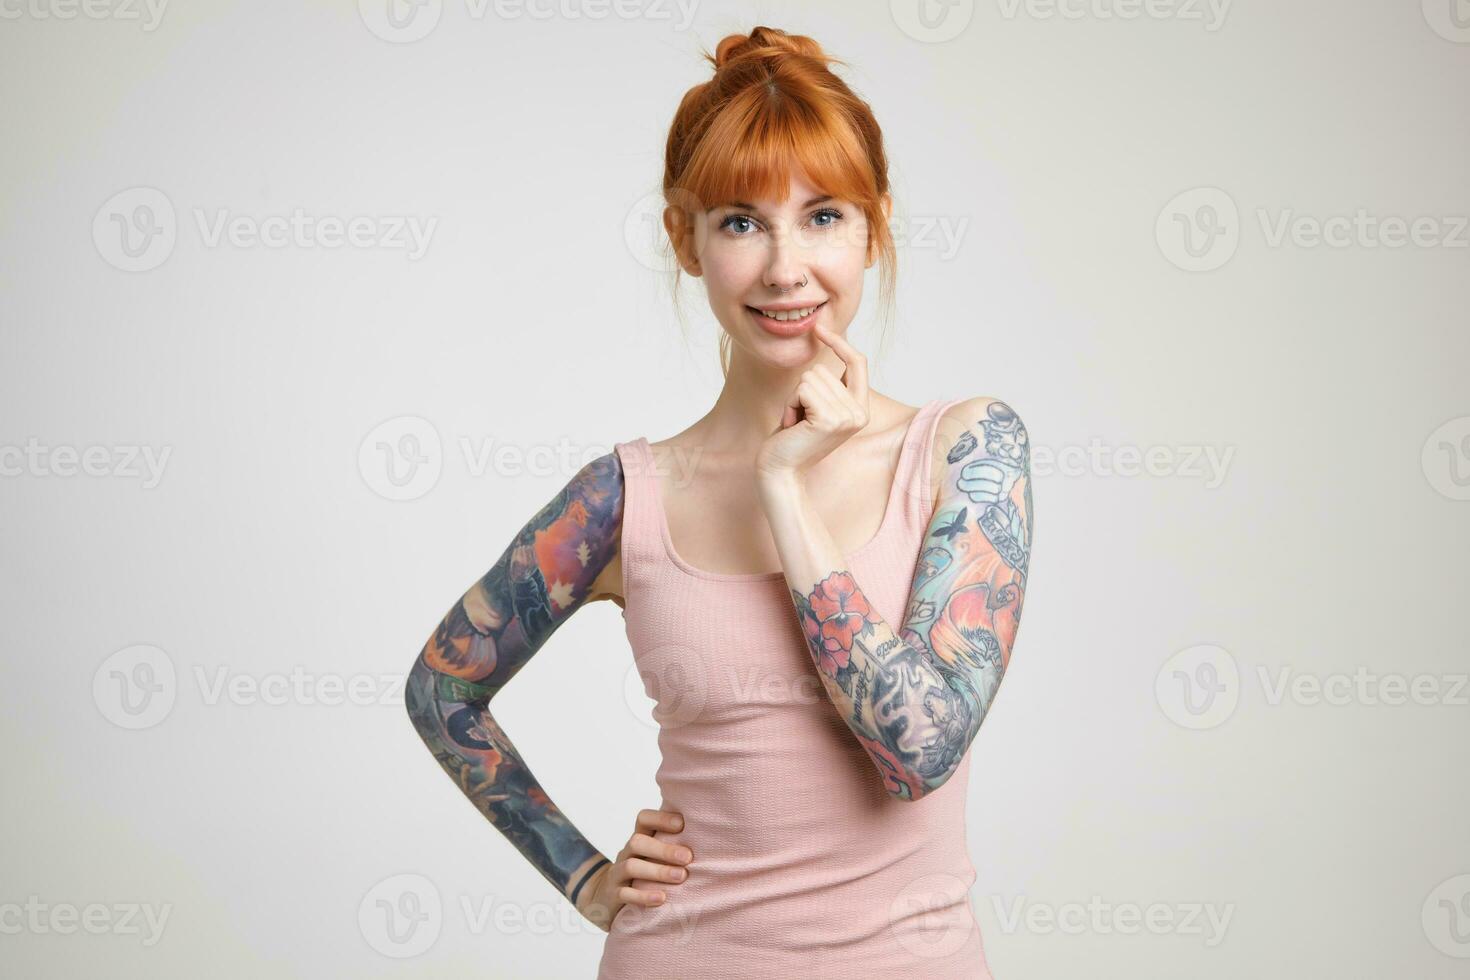 Cheerful young lovely redhead tattooed lady with nose piercing looking positively at camera with charming smile, standing against white background in nude shirt photo